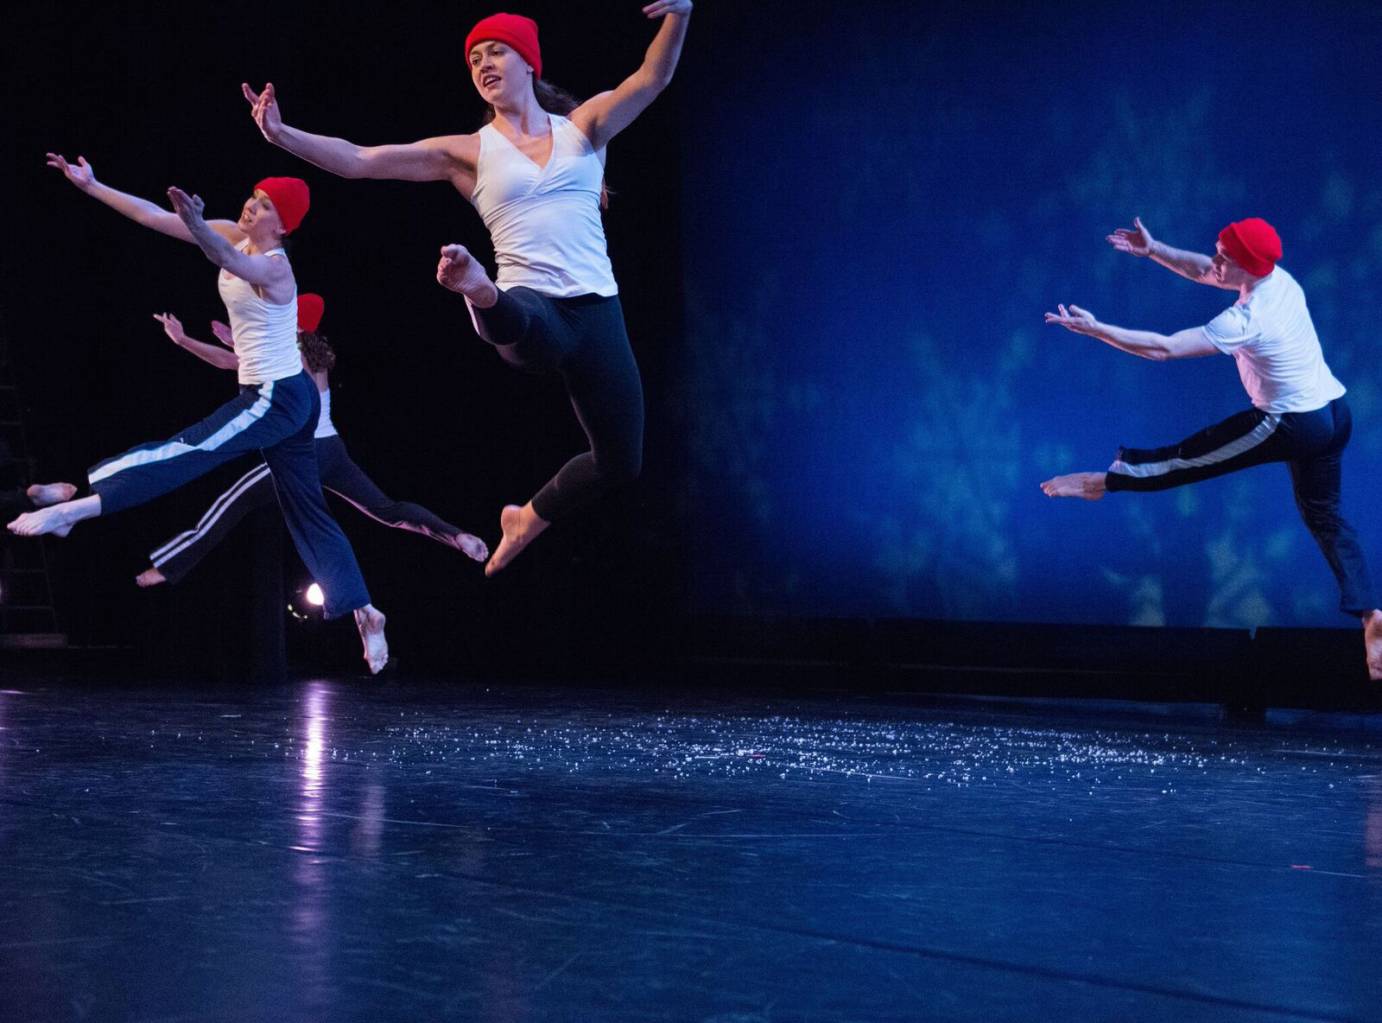 Dancers in white t-shirts and red caps jeté merrily